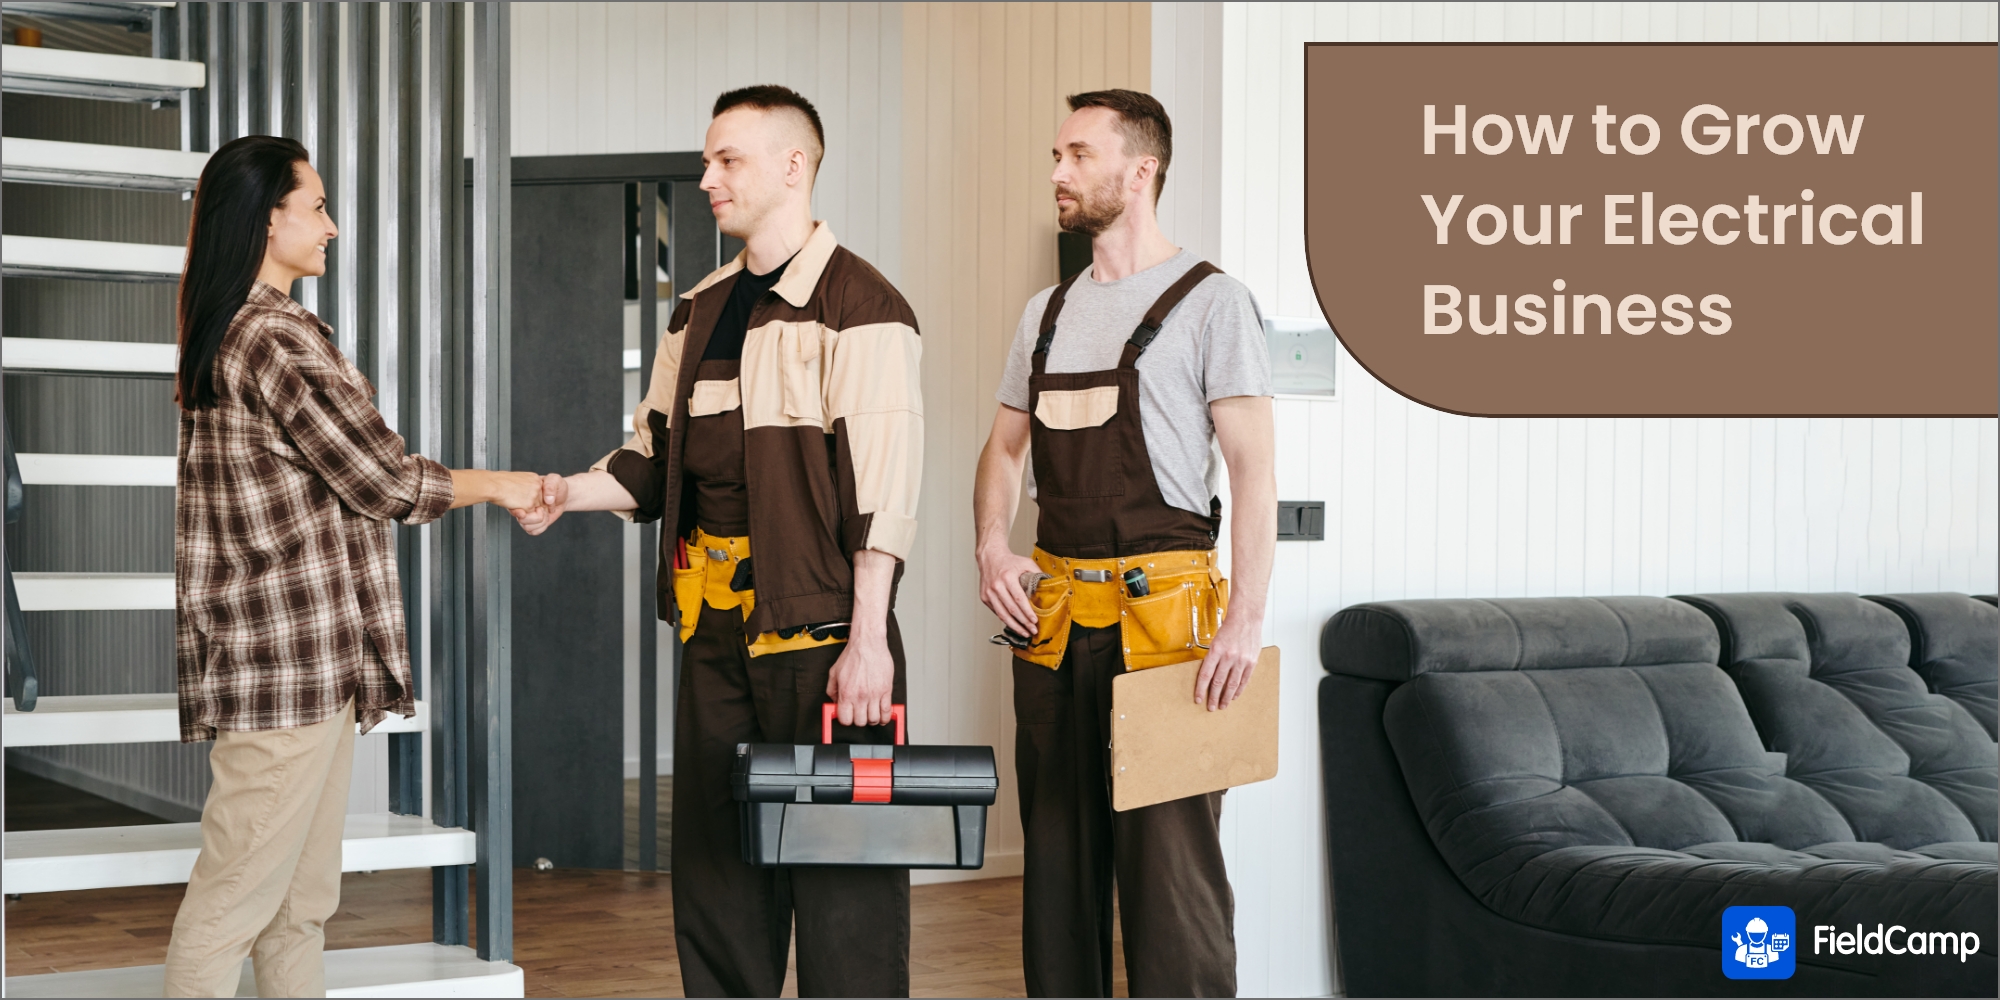 How to Grow Your Electrical Business